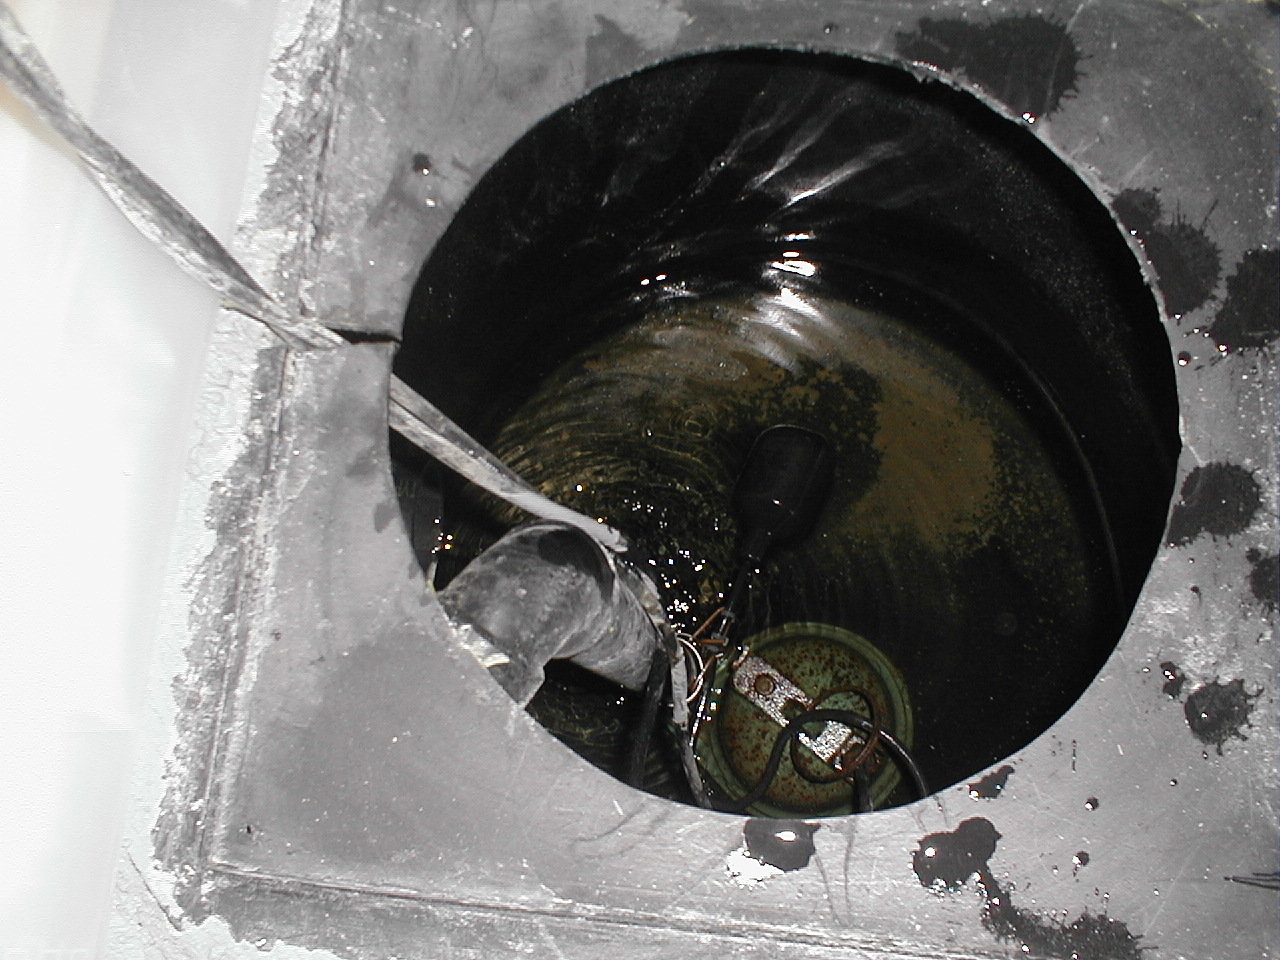 Typical sump pit